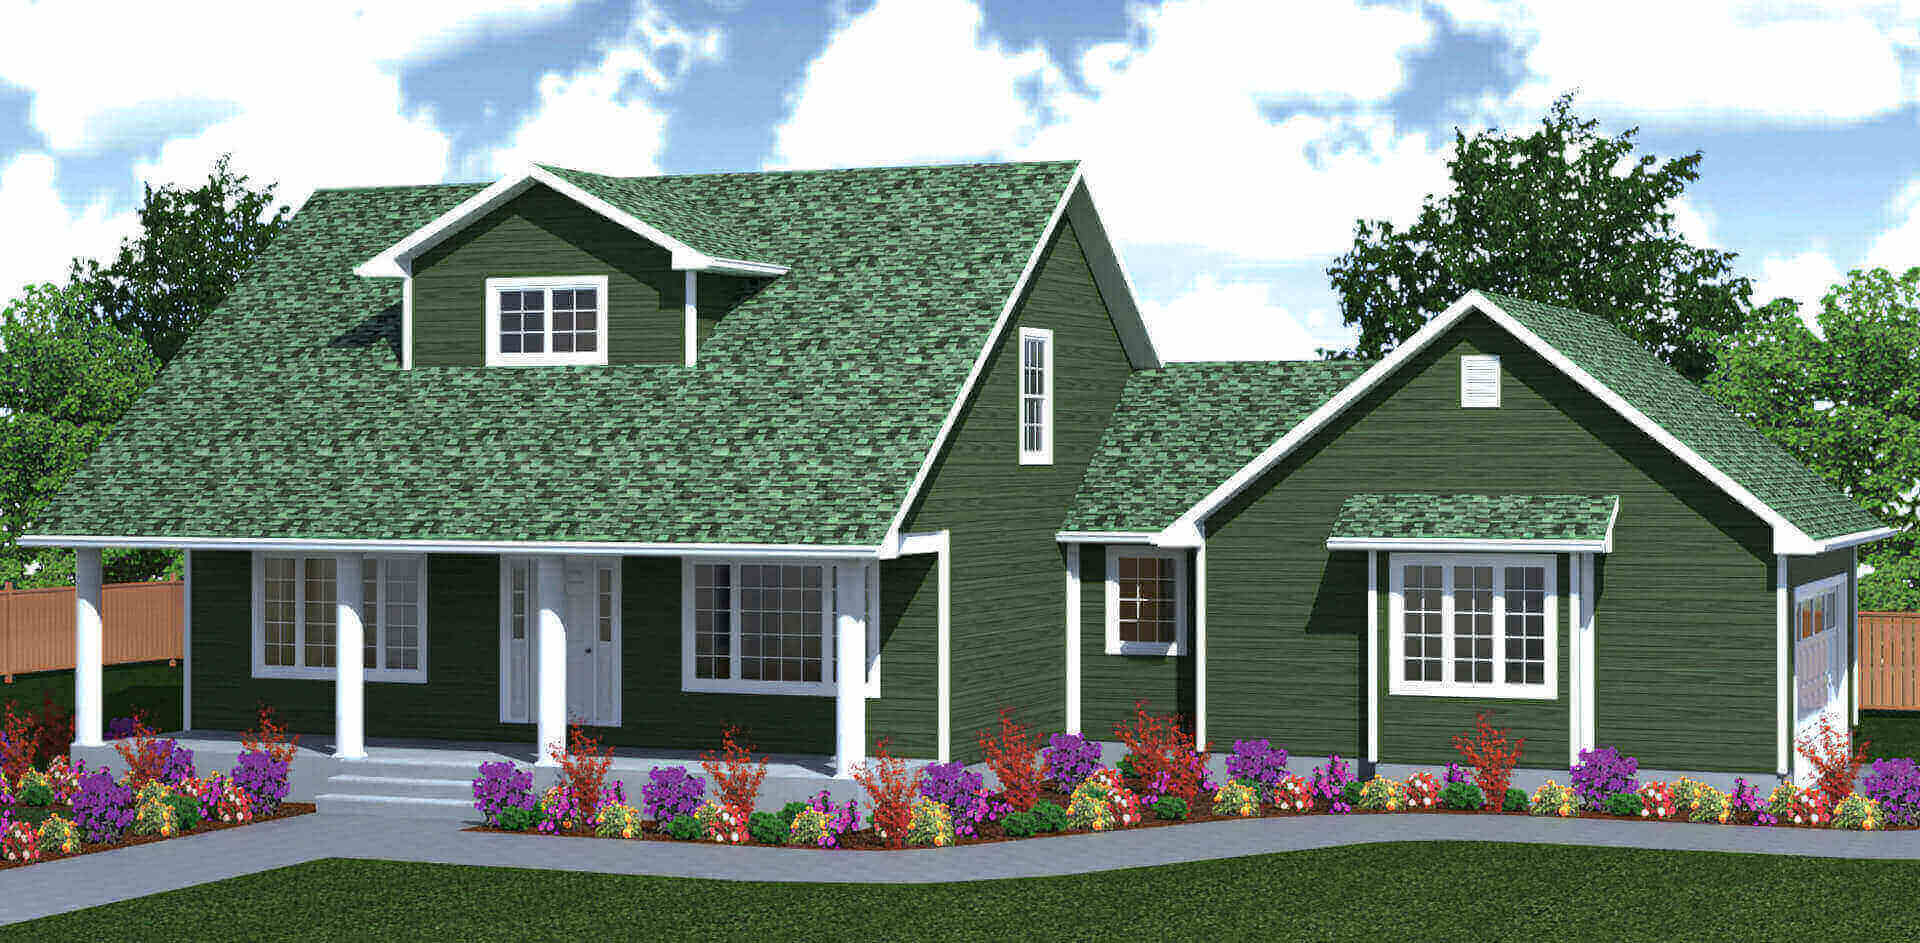 1723 sq.ft. timber mart house 3 bed 2.5 bath exterior render